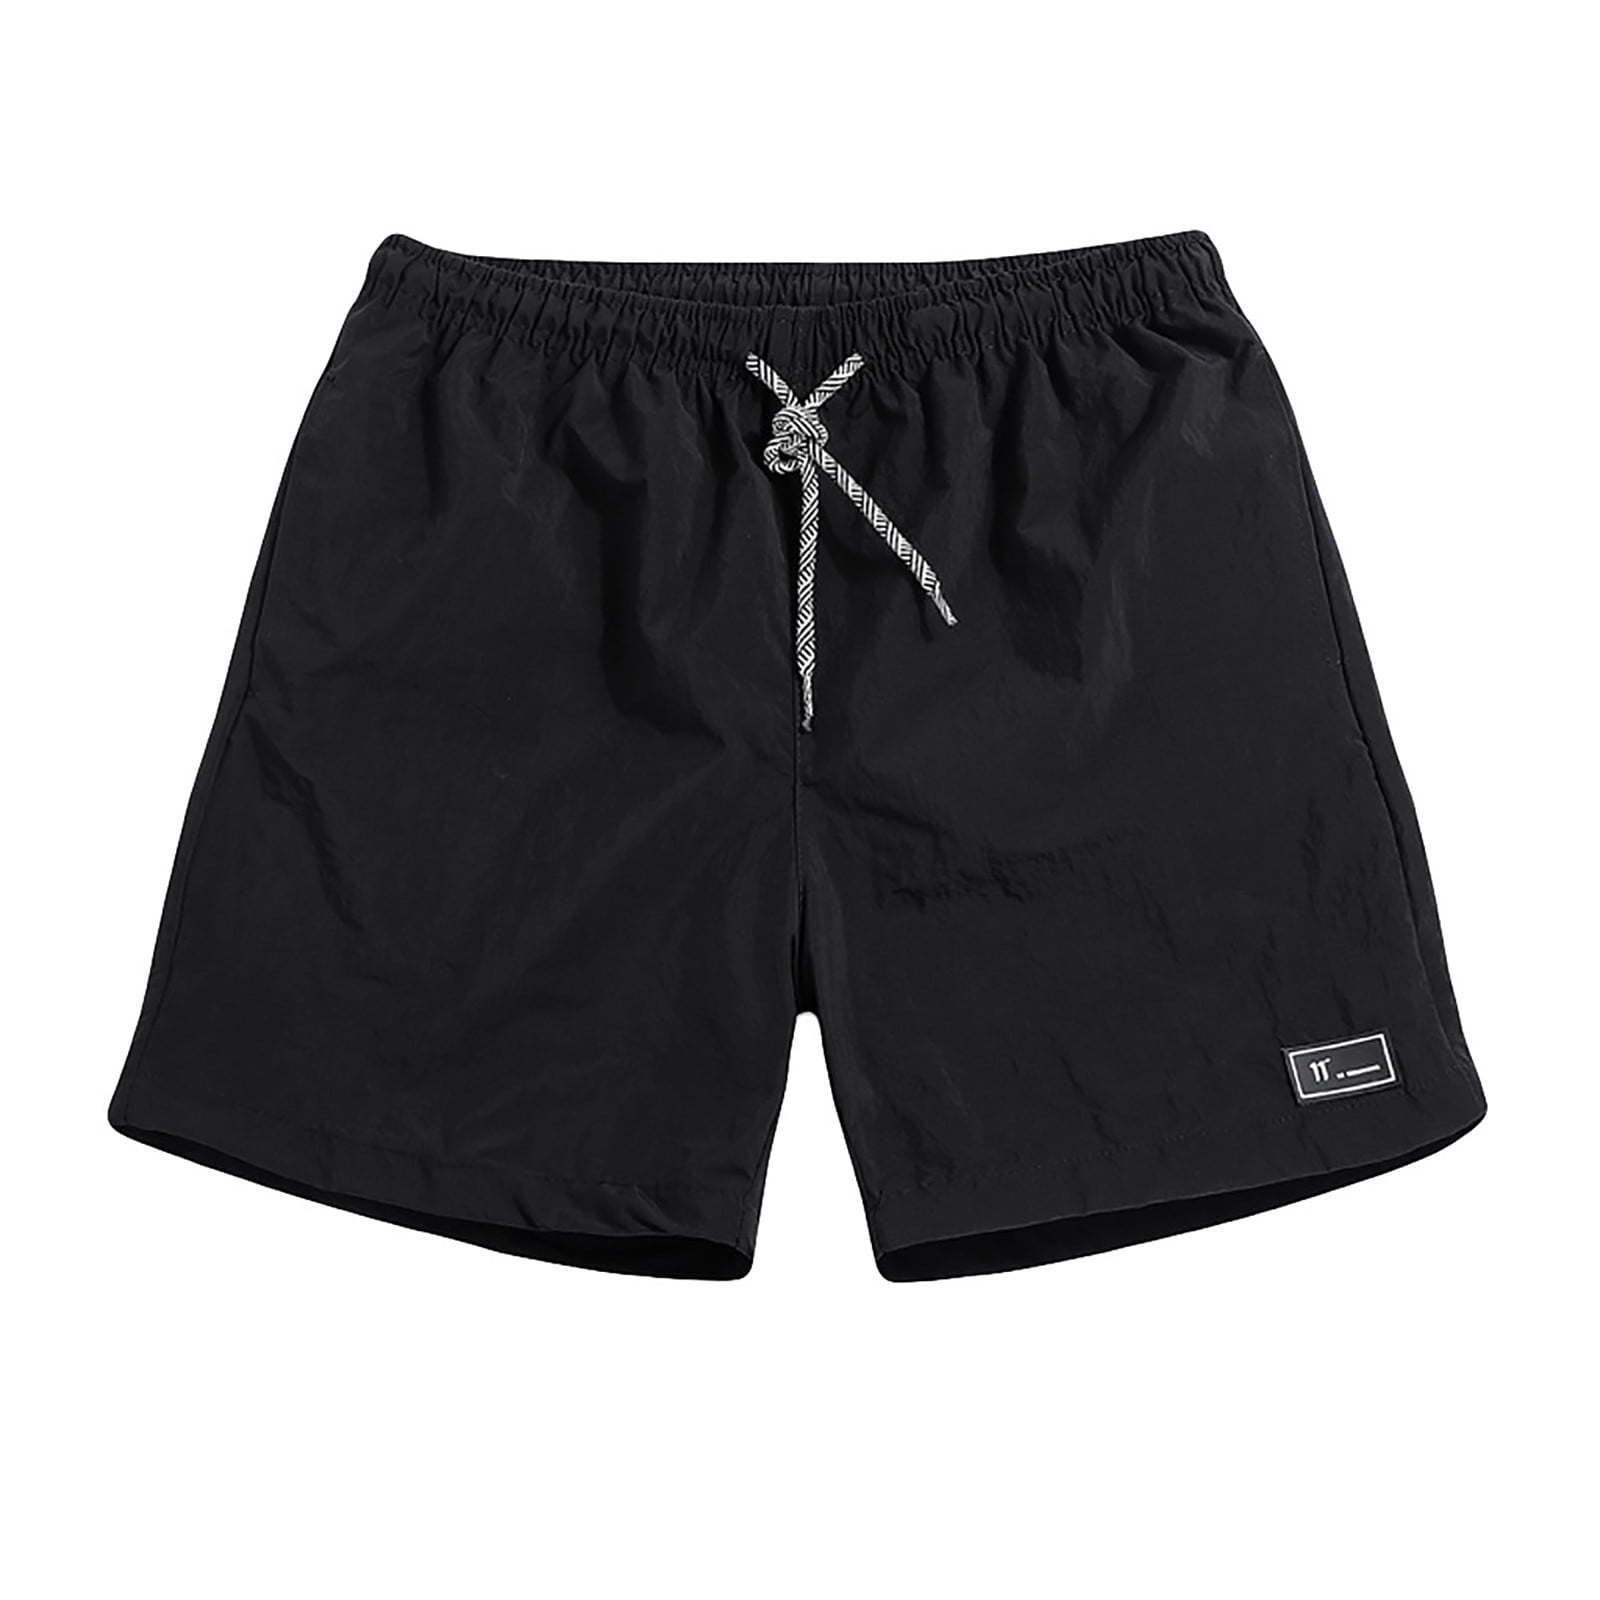 Xysaqa Men Quick Dry Trunks Board Shorts, Casual Summer Party Beach ...